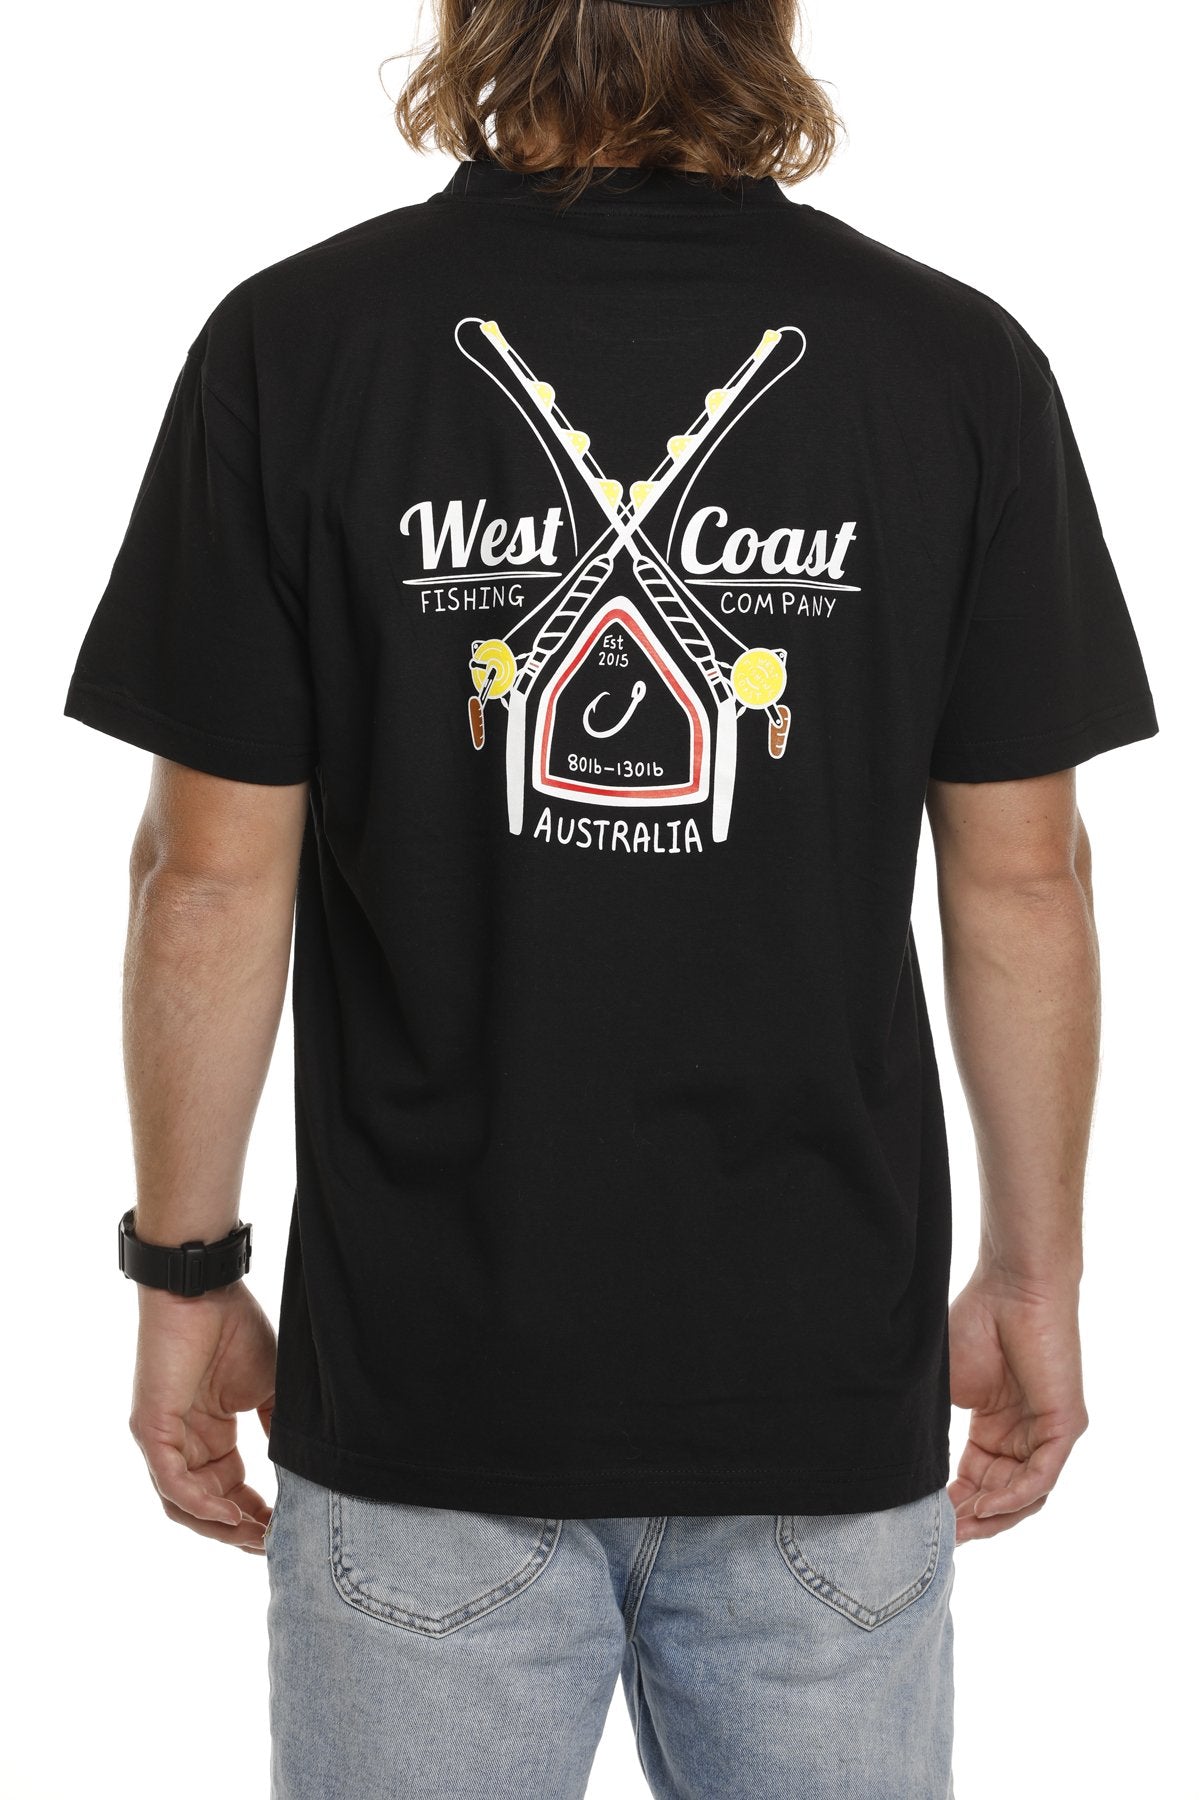 West Coast Fishing Co Sports Fisher Tee Black - Compleat Angler Nedlands  Pro Tackle